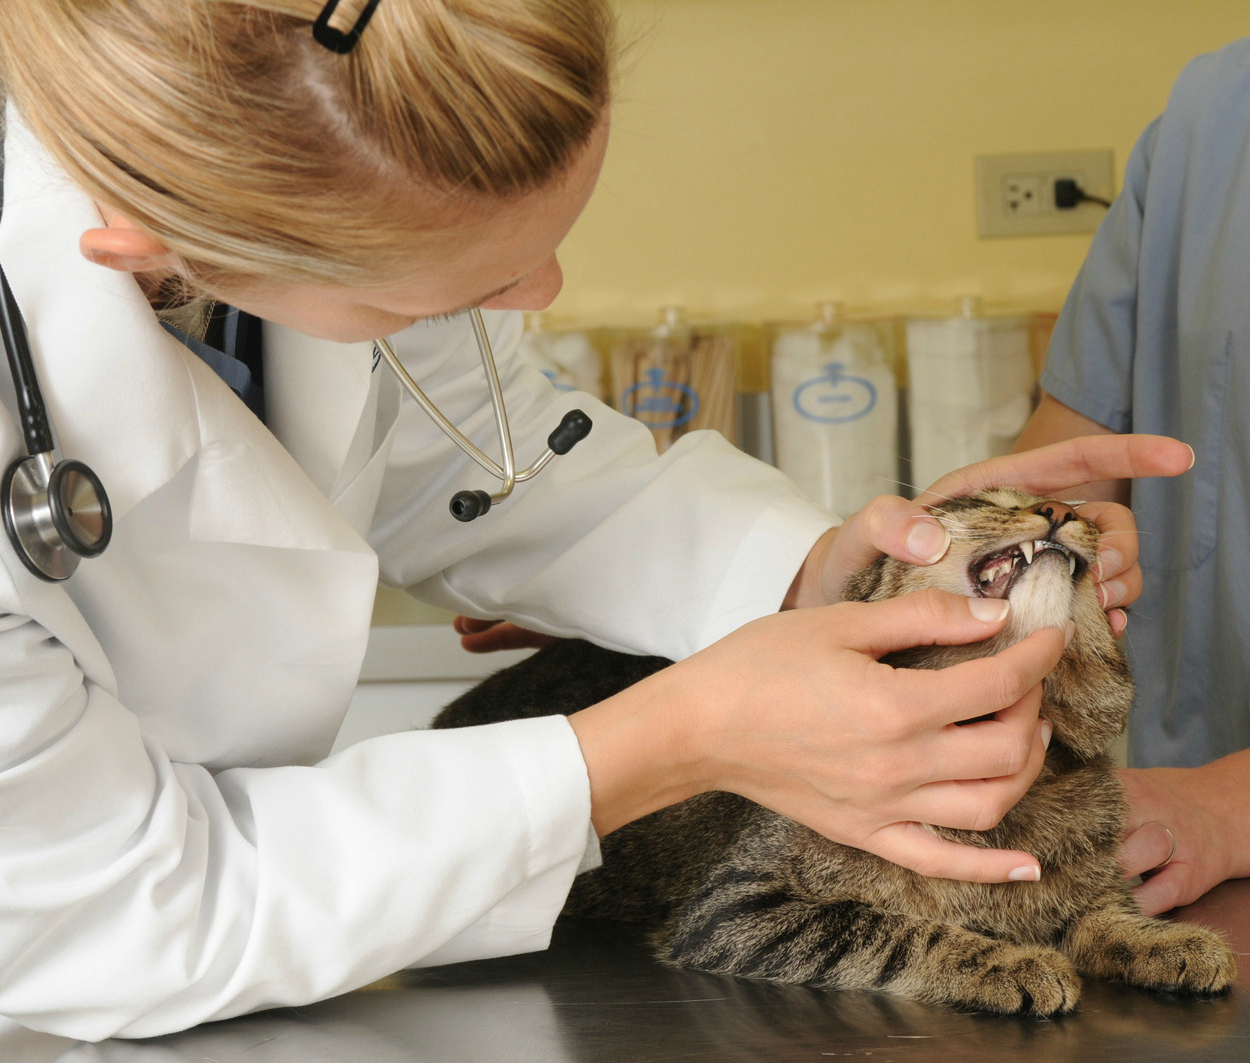 Animal Medical Clinic of Chesapeake offers Affordable Wellness Plans and Preventive Care for Pets at 921 Battlefield Blvd, Chesapeake, Va 23320